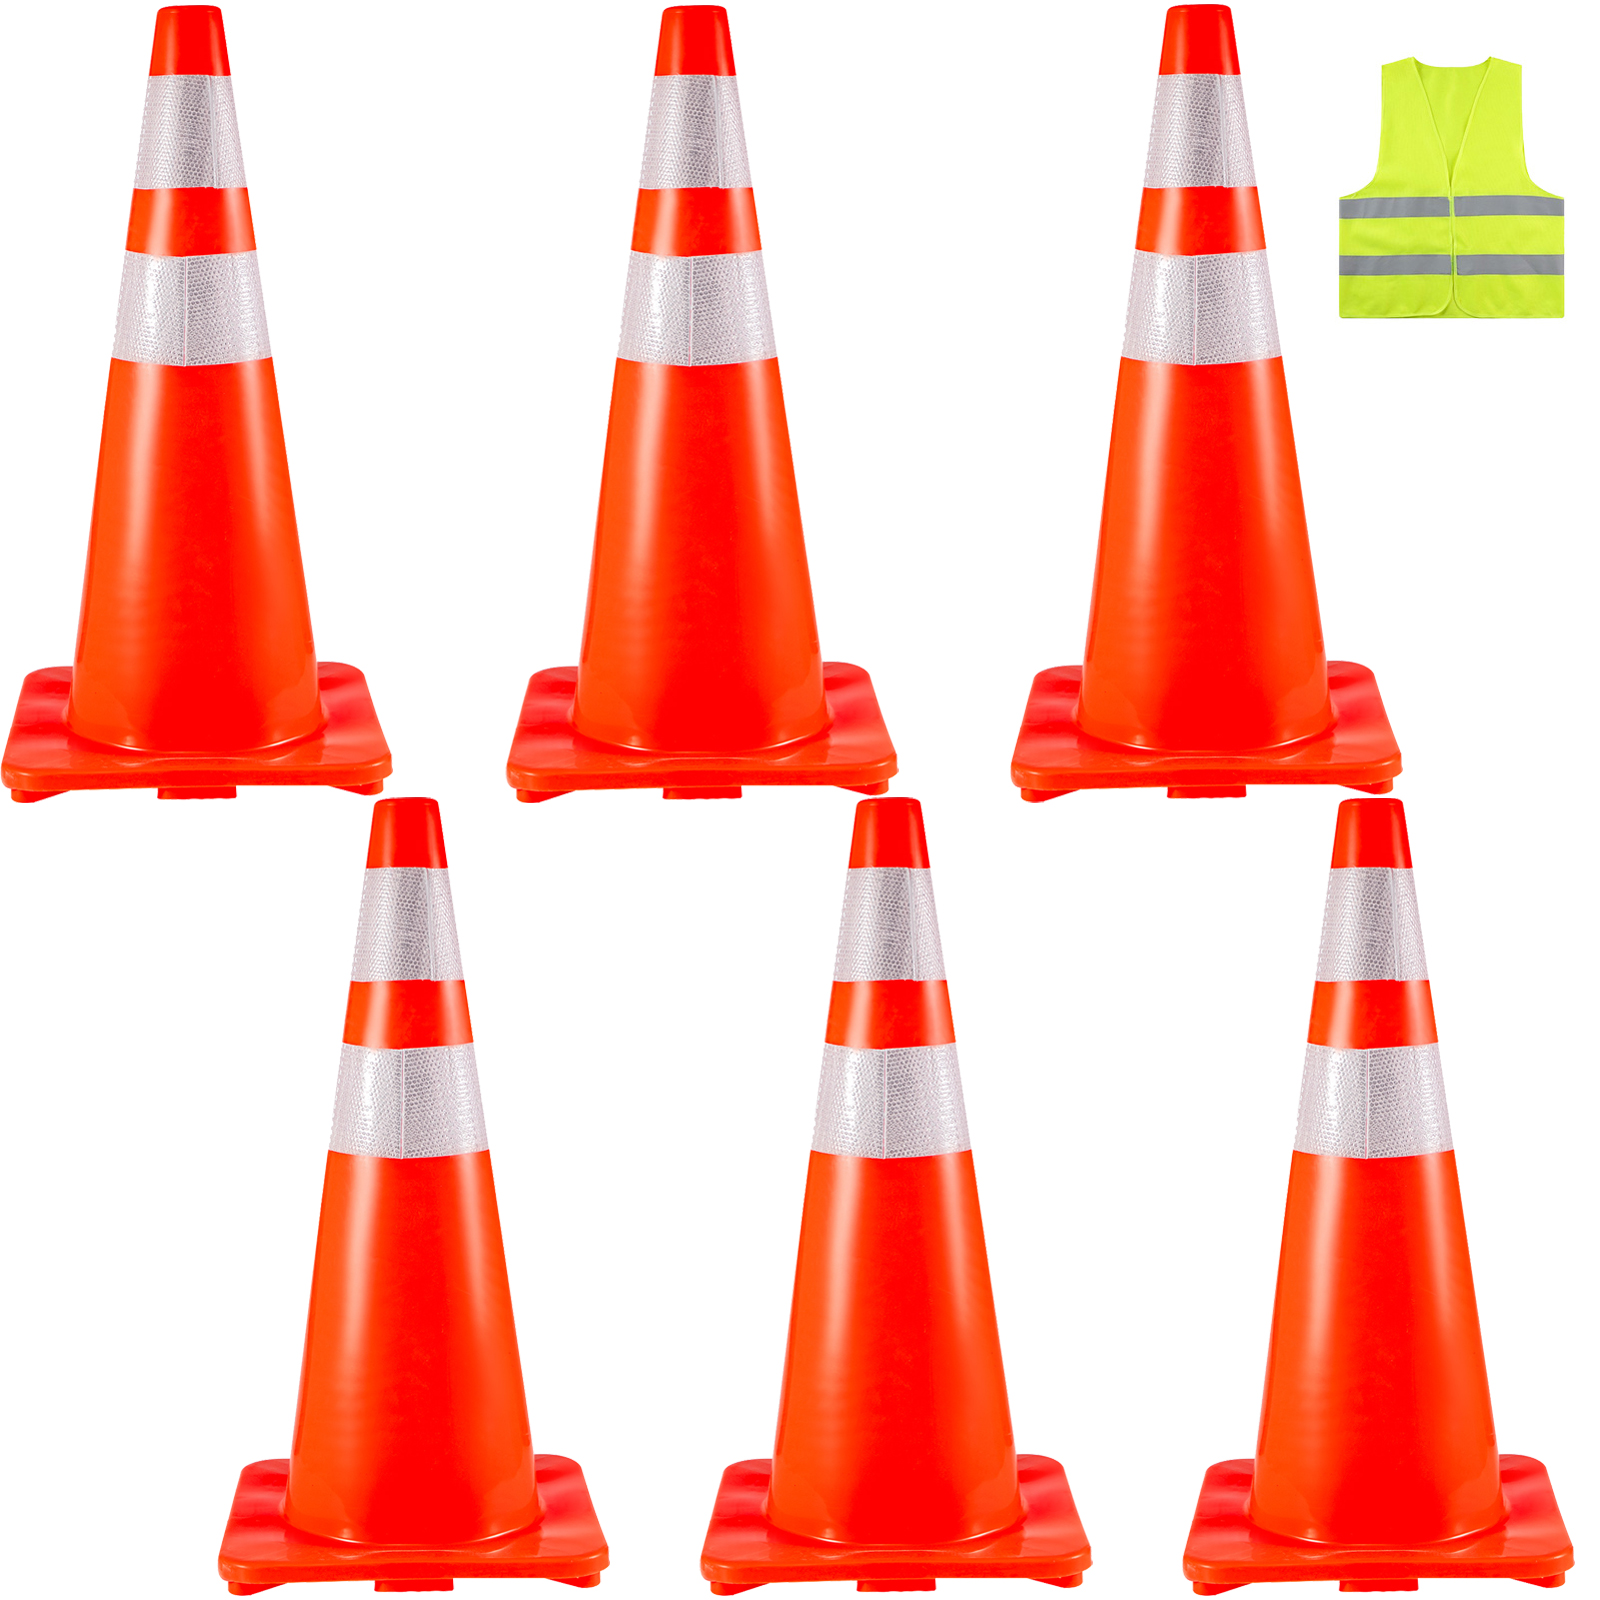 6x28" Traffic Safety Parking Cones 2reflective Collars Higher Warning Roads от Vevor Many GEOs